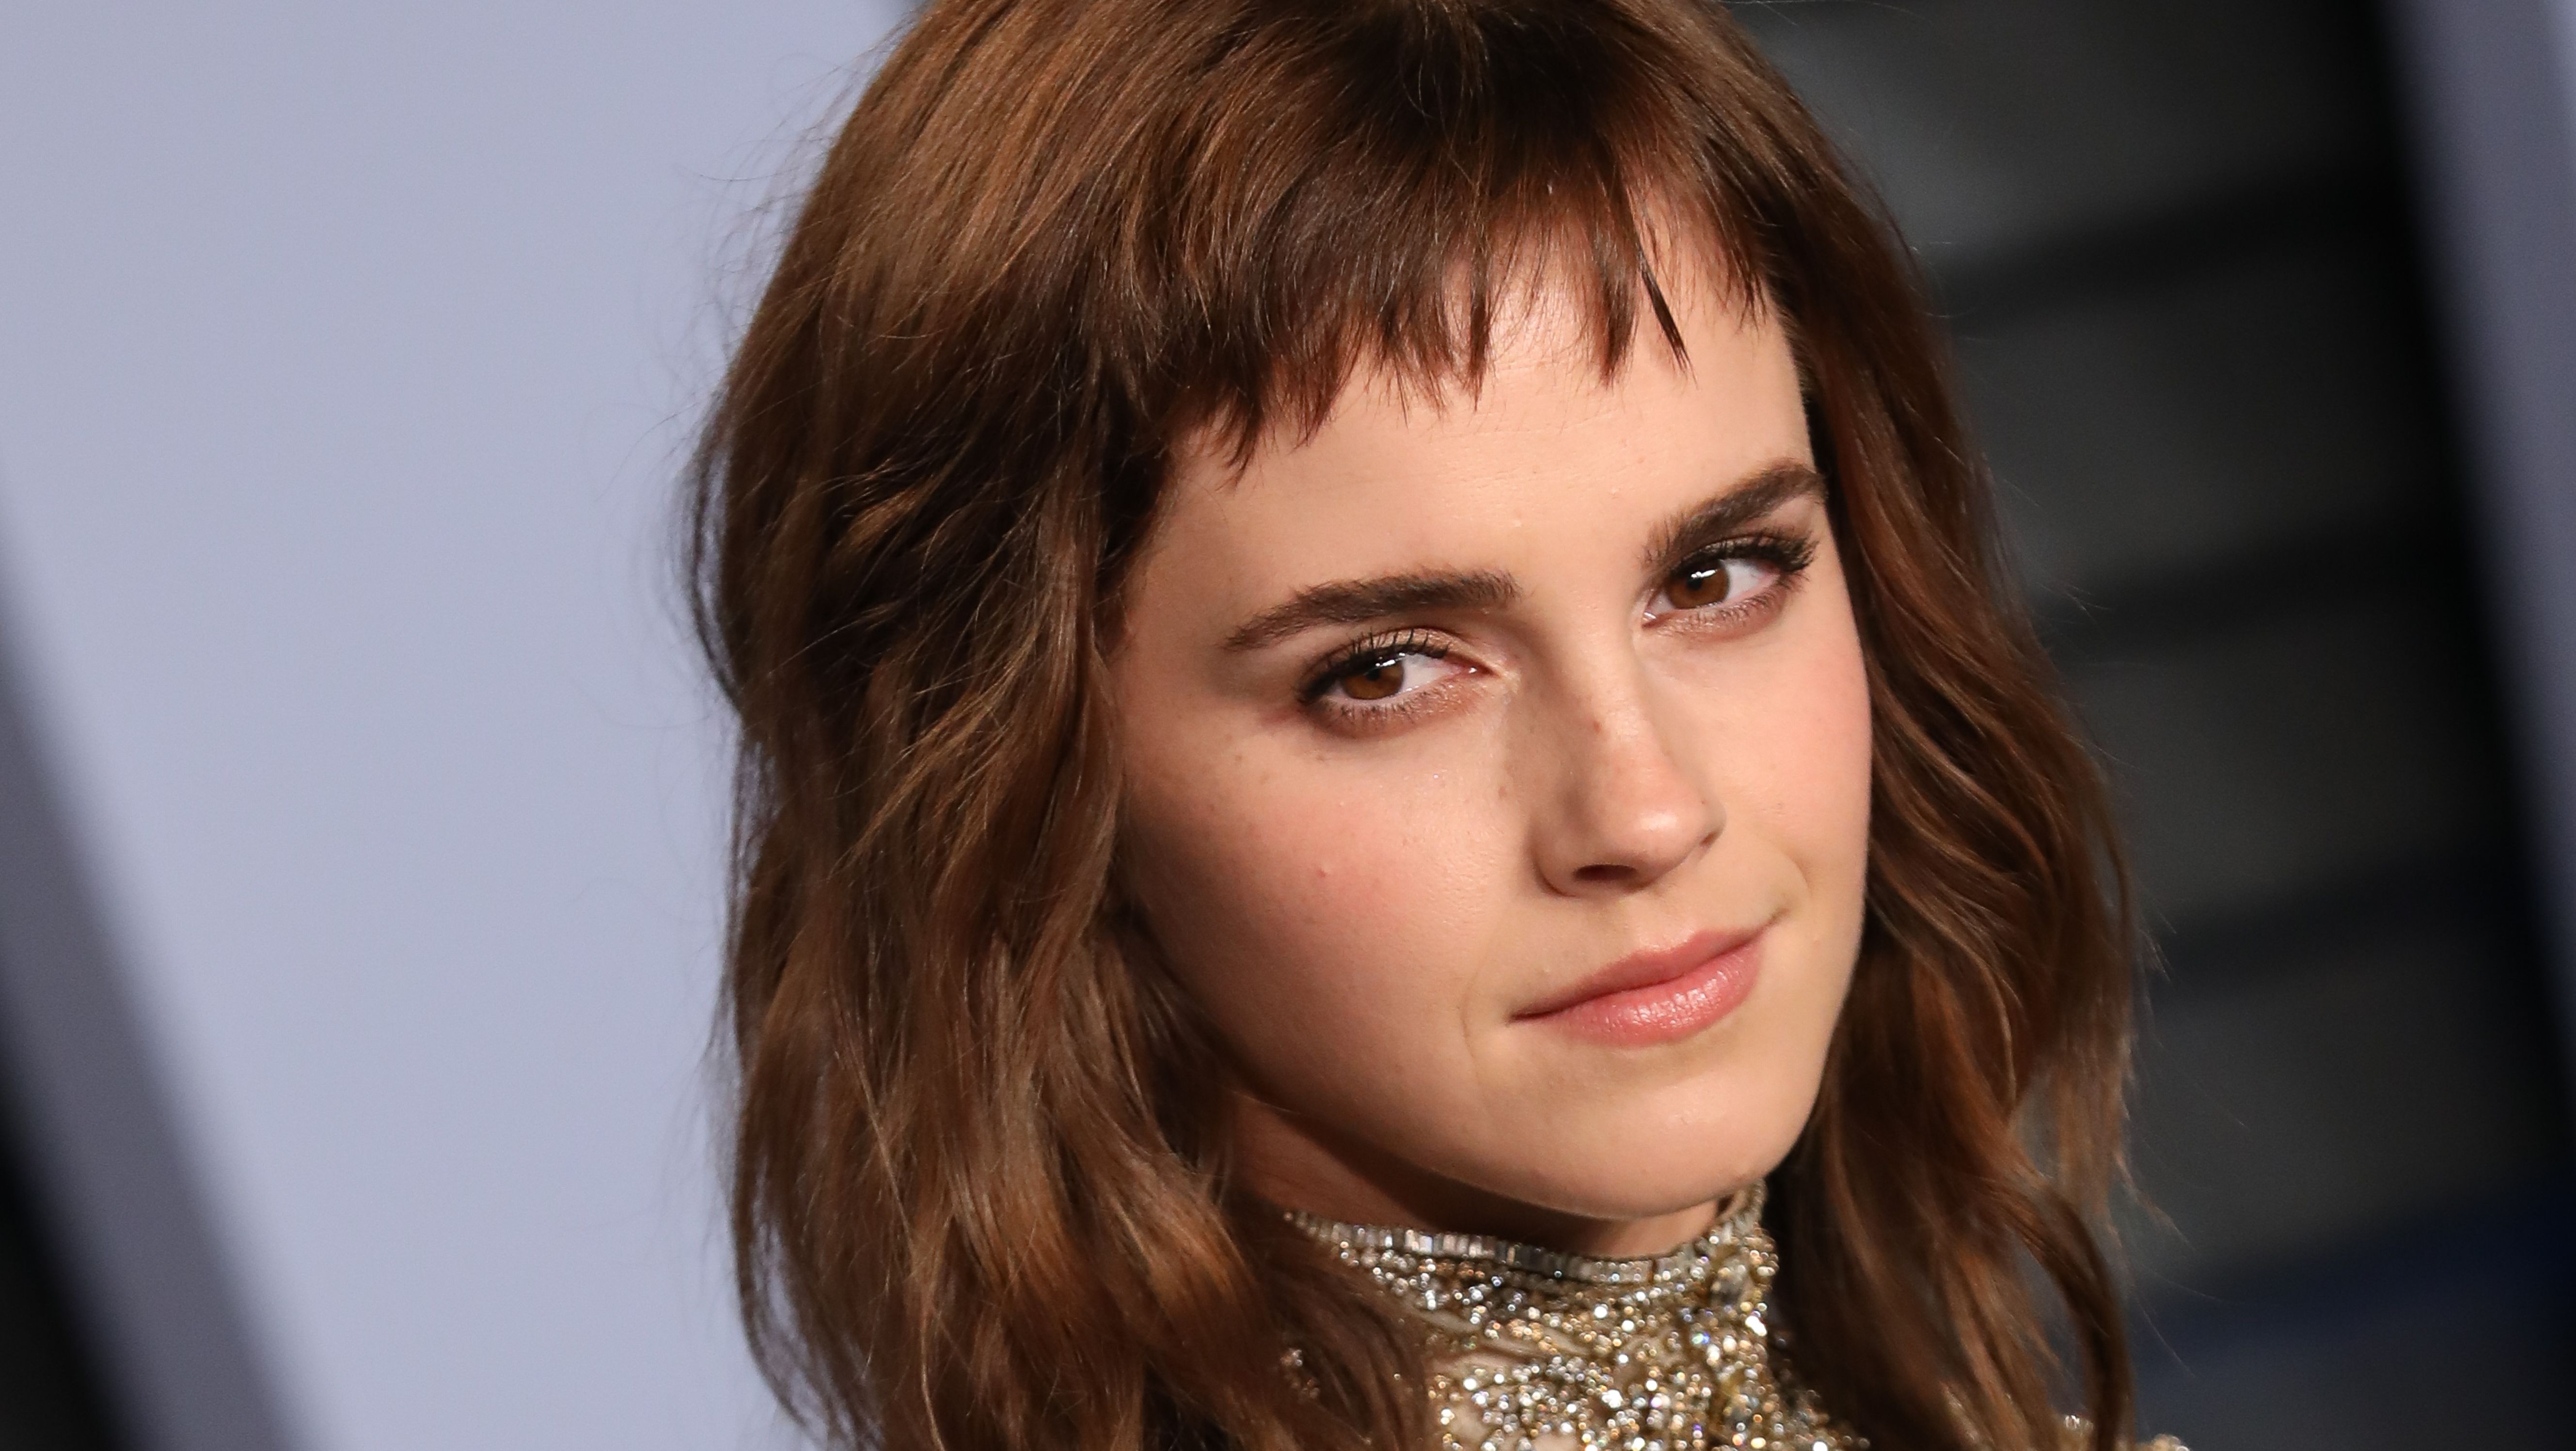 Emma Watson Transforms Her Hair With a Chic, Choppy Bob | Marie Claire